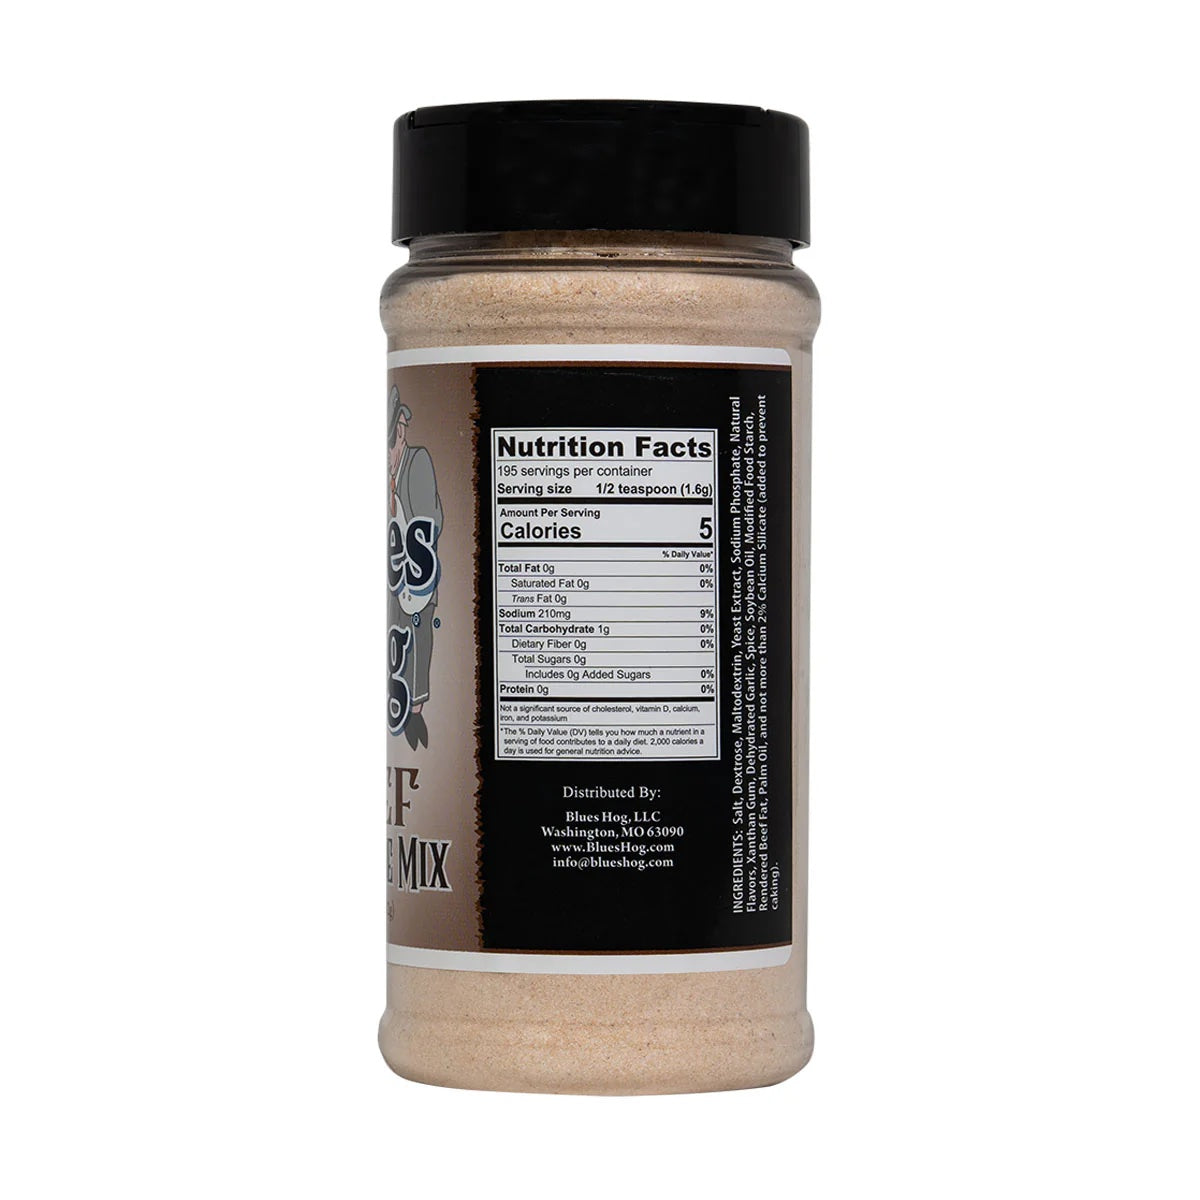 A jar of Blues Hog Beef Marinade Mix with a black lid, showing the nutrition facts label on the back. The label indicates 195 servings per container, with each serving being 1/2 teaspoon (1.6g). The mix contains 5 calories per serving and has no fat, 210mg of sodium, 1g of total carbohydrates, no sugars, and no protein.